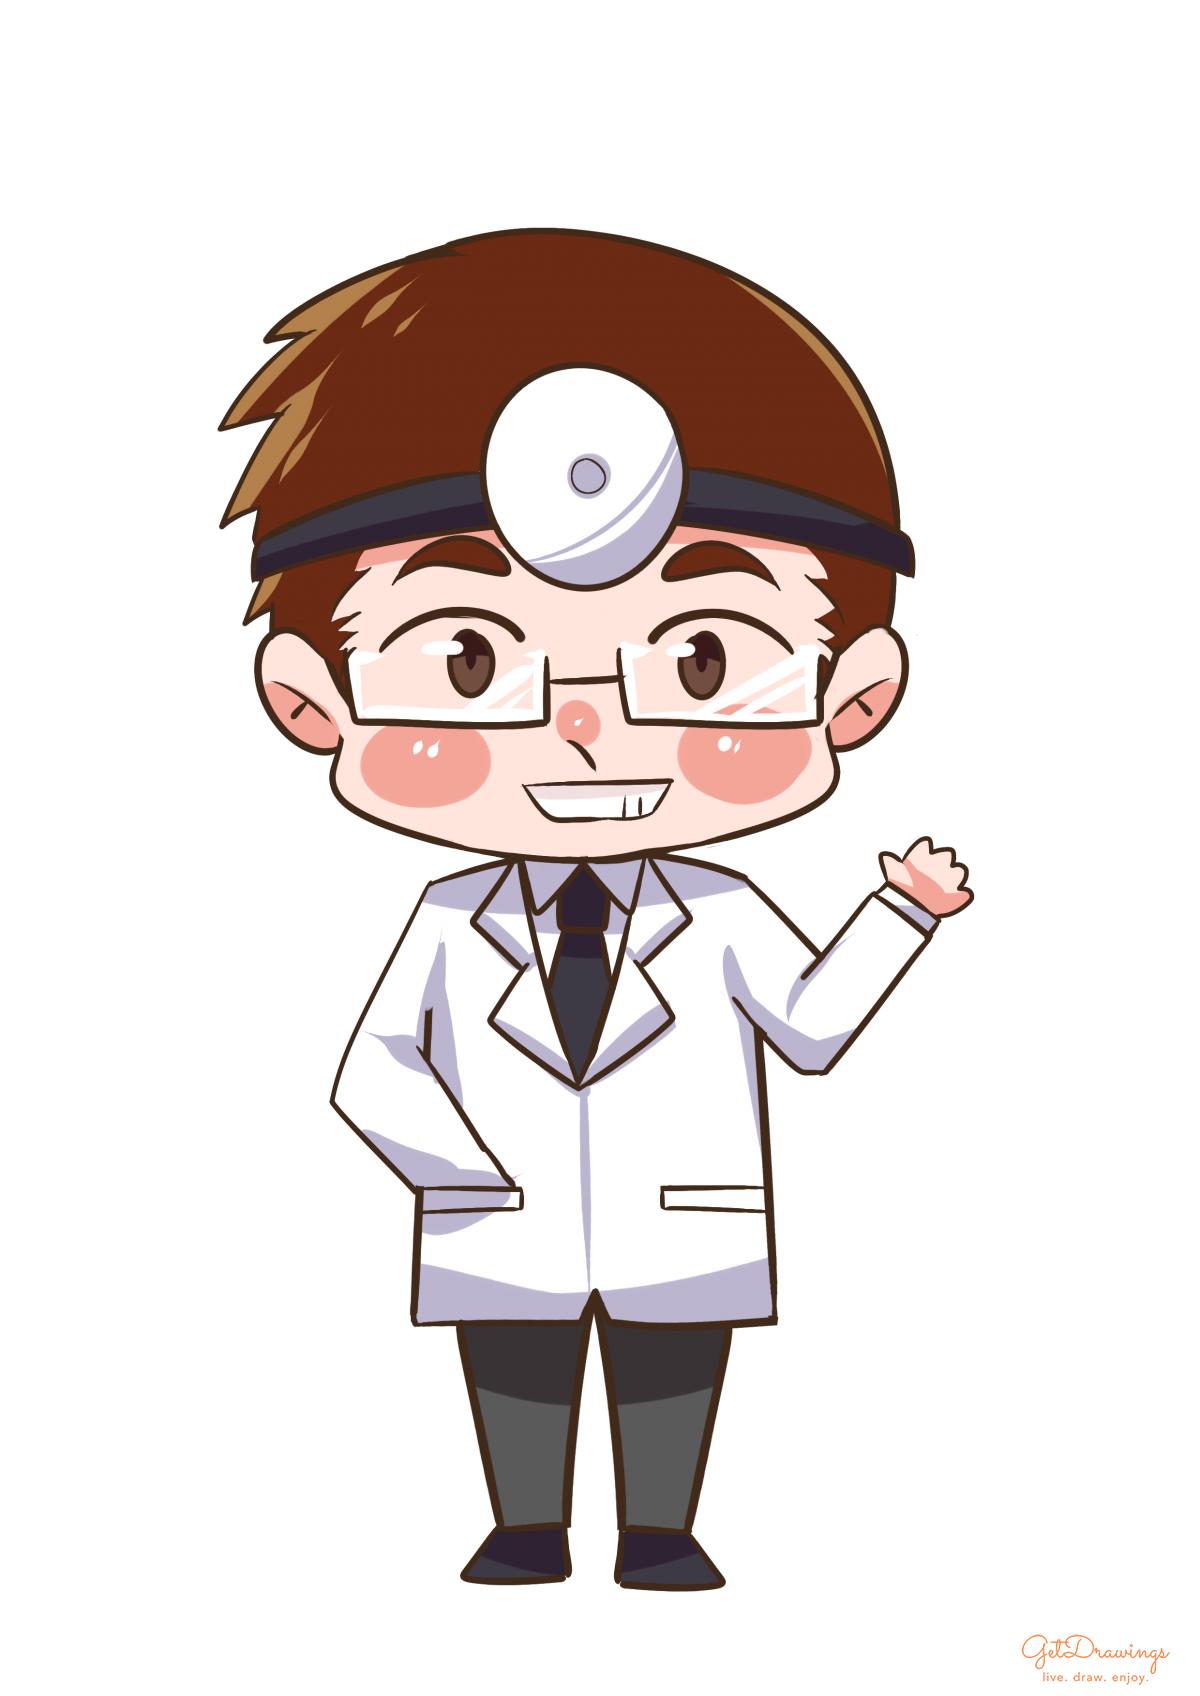 How to draw a Doctor?